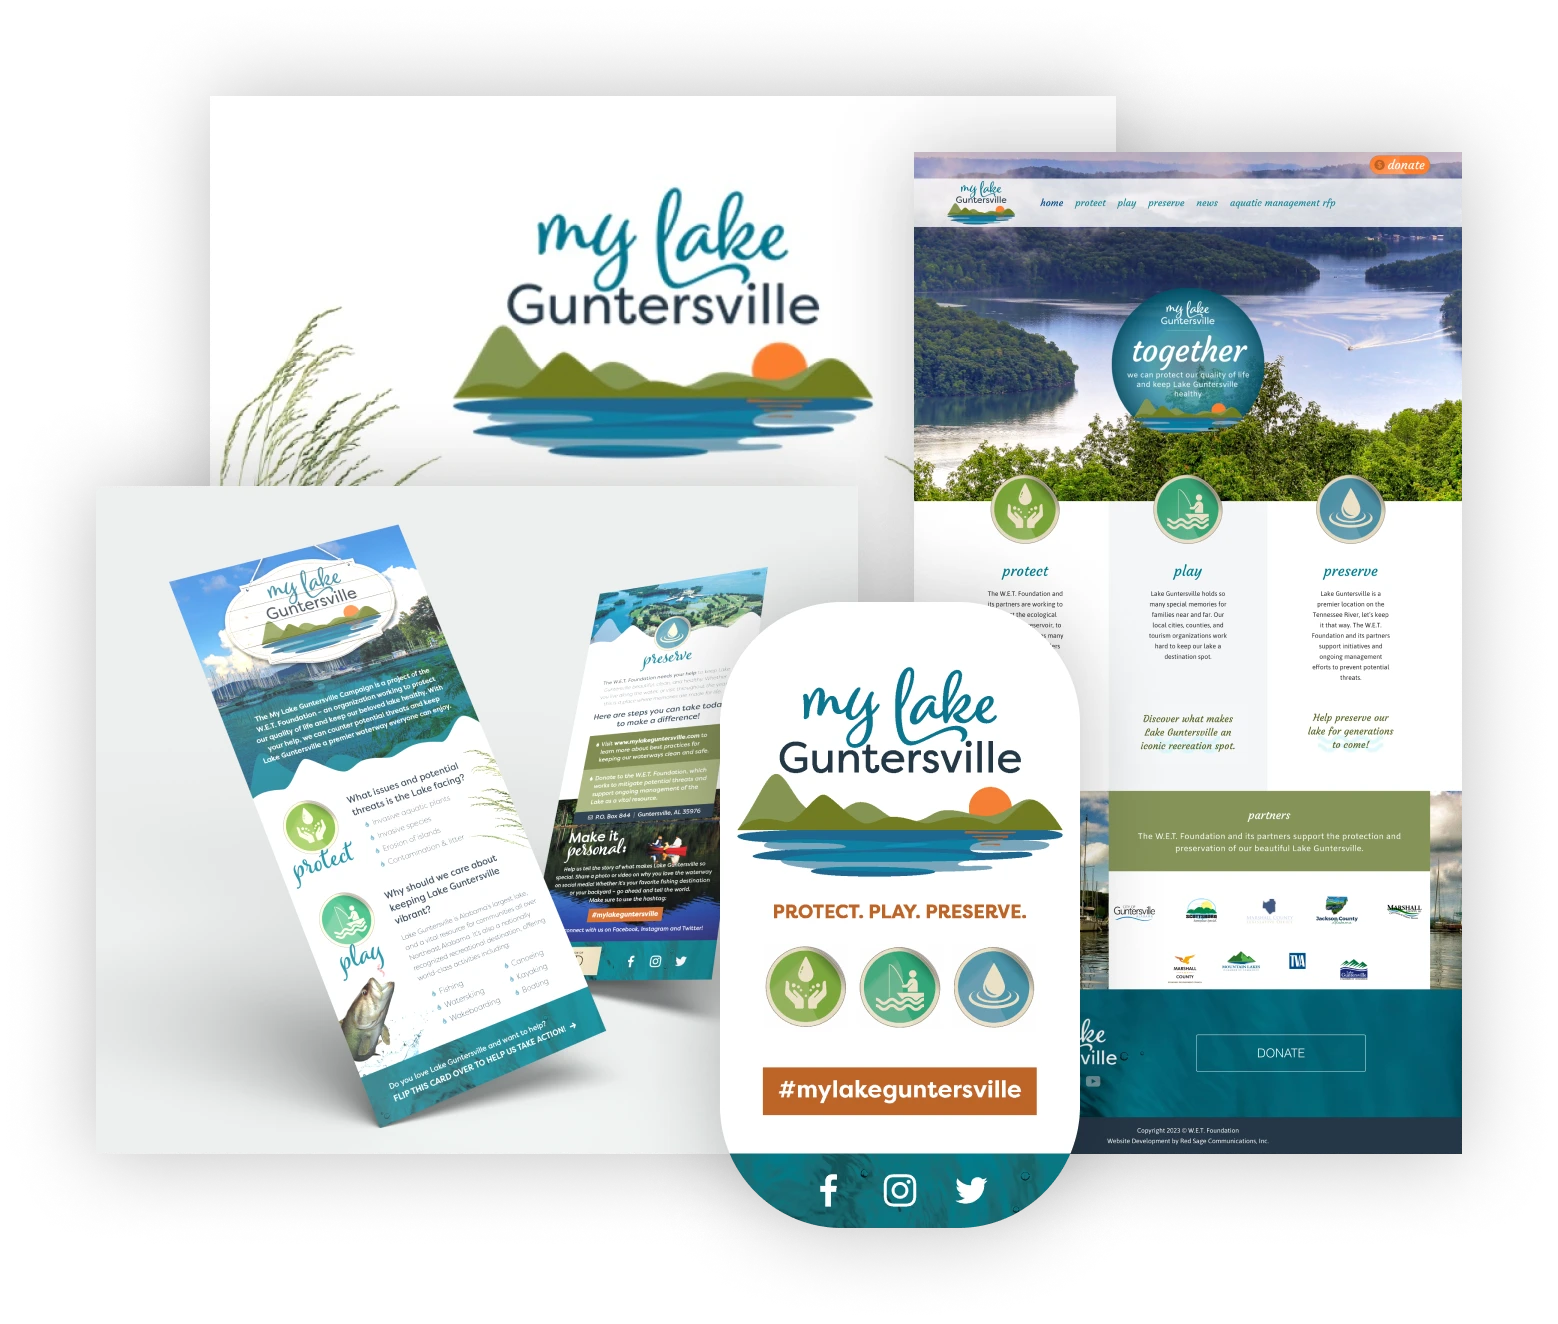 My Lake Guntersville brand identity assets including a homepage capture, developed by branding agency Red Sage Communications